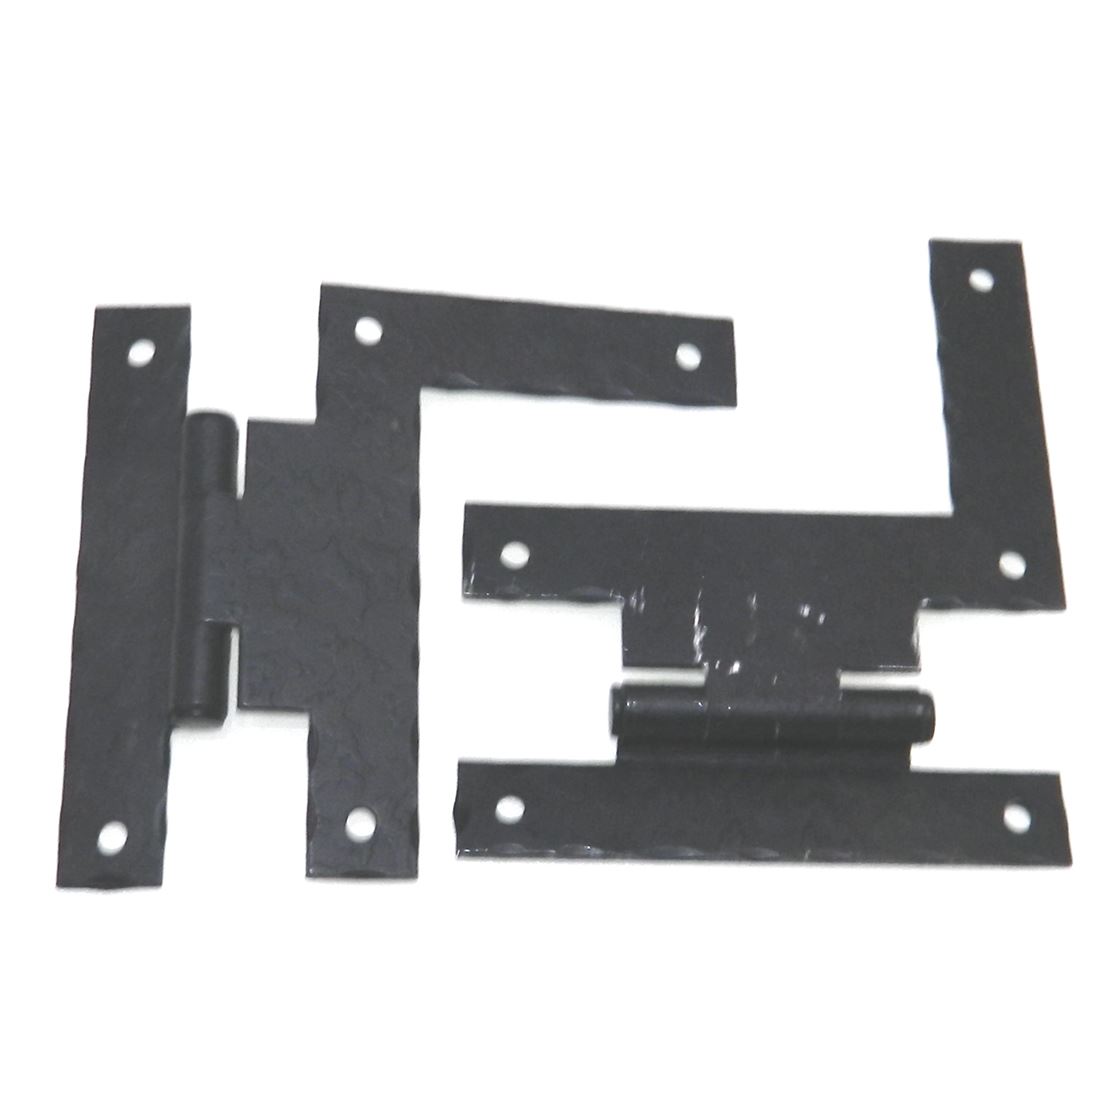 Pair Stanley Square Hammered Colonial Black 3/8" Offset "HL" Hinges W858-3-8-J1